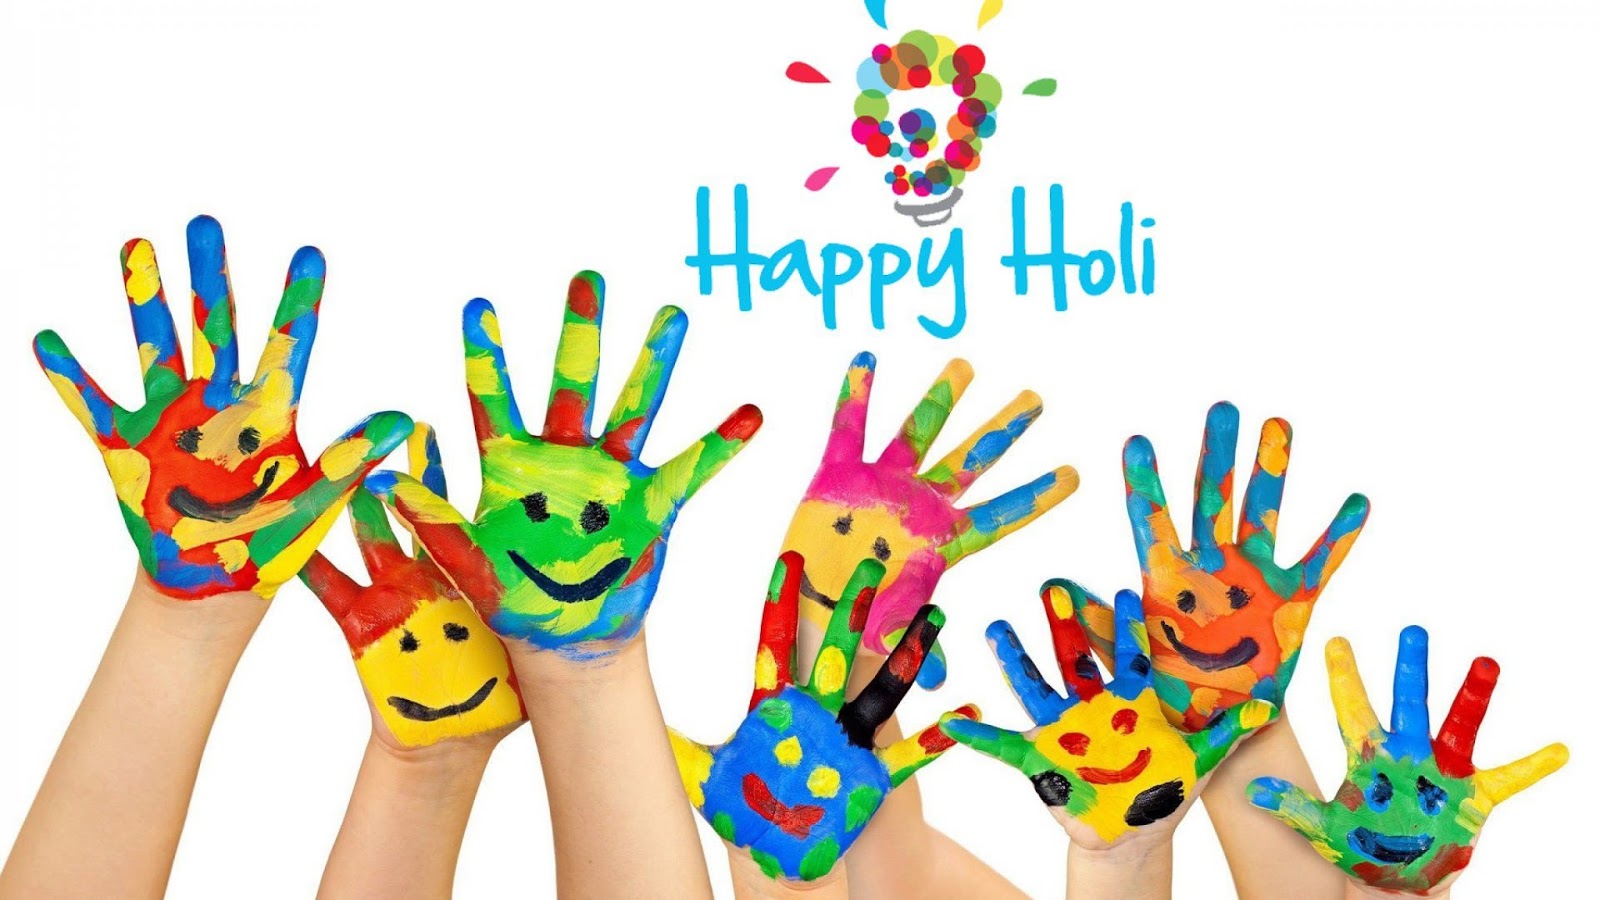 100+ Top Happy Holi HD Wallpapers, Images, Photo Free Download 2019